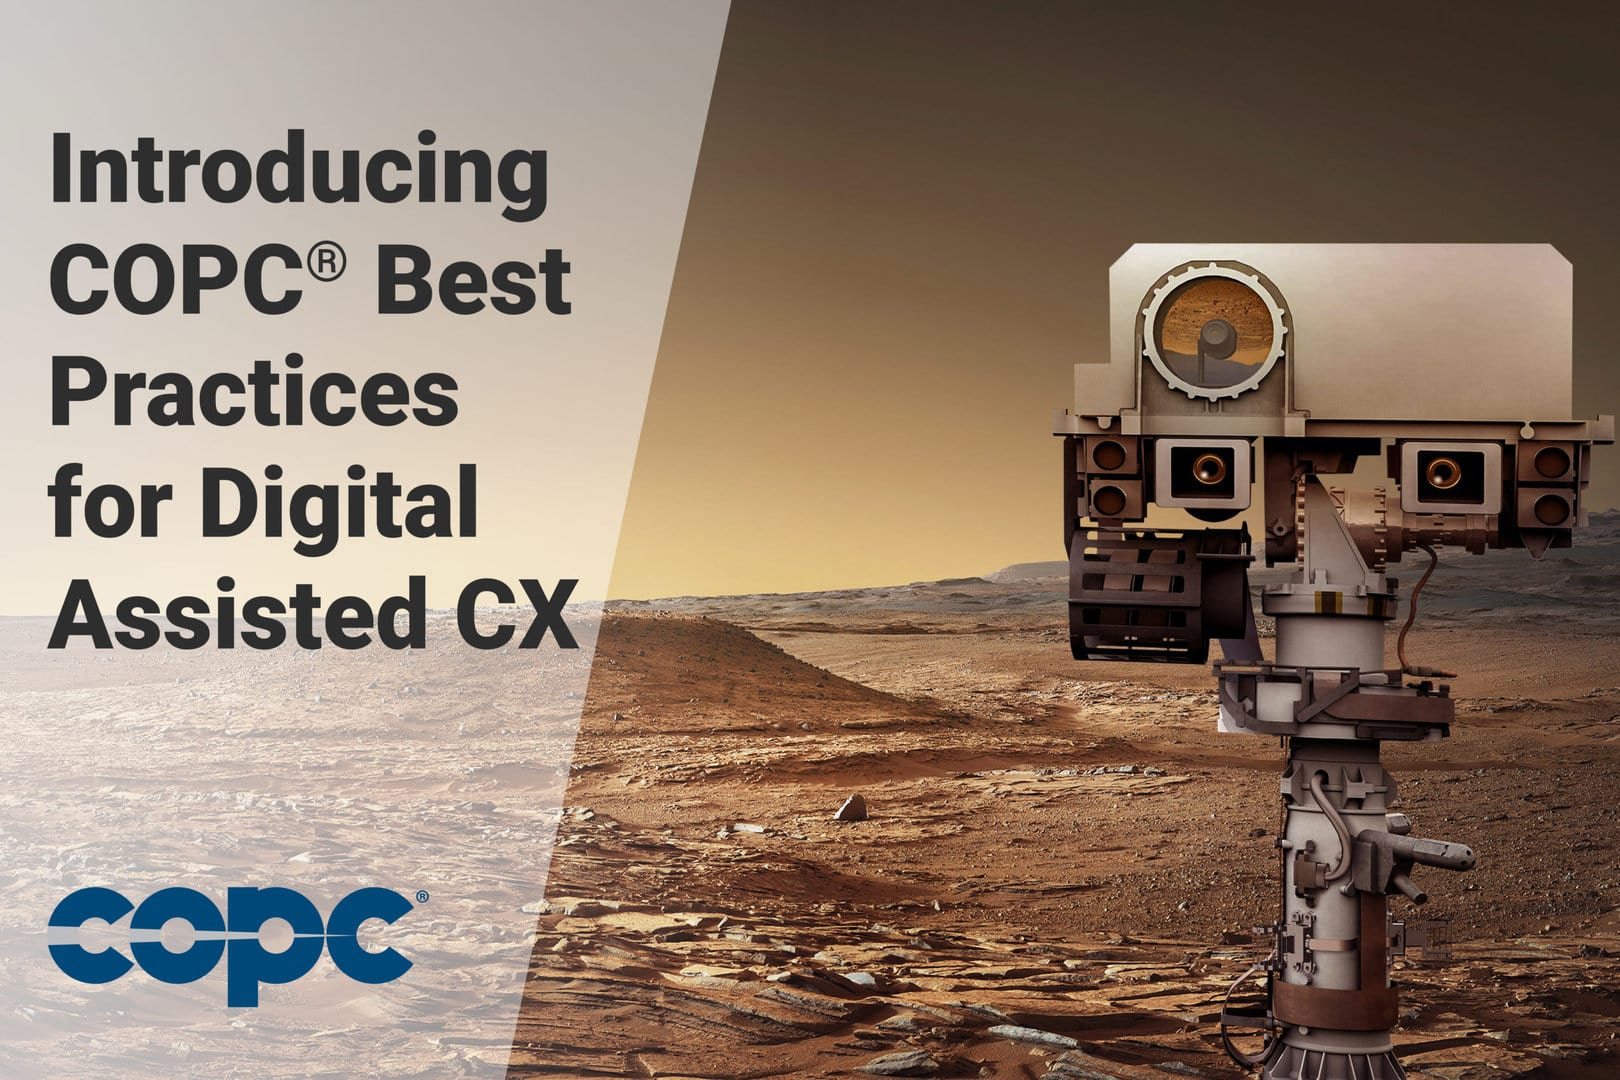 Image of the mars rover with text introducing COPC best practices digital.